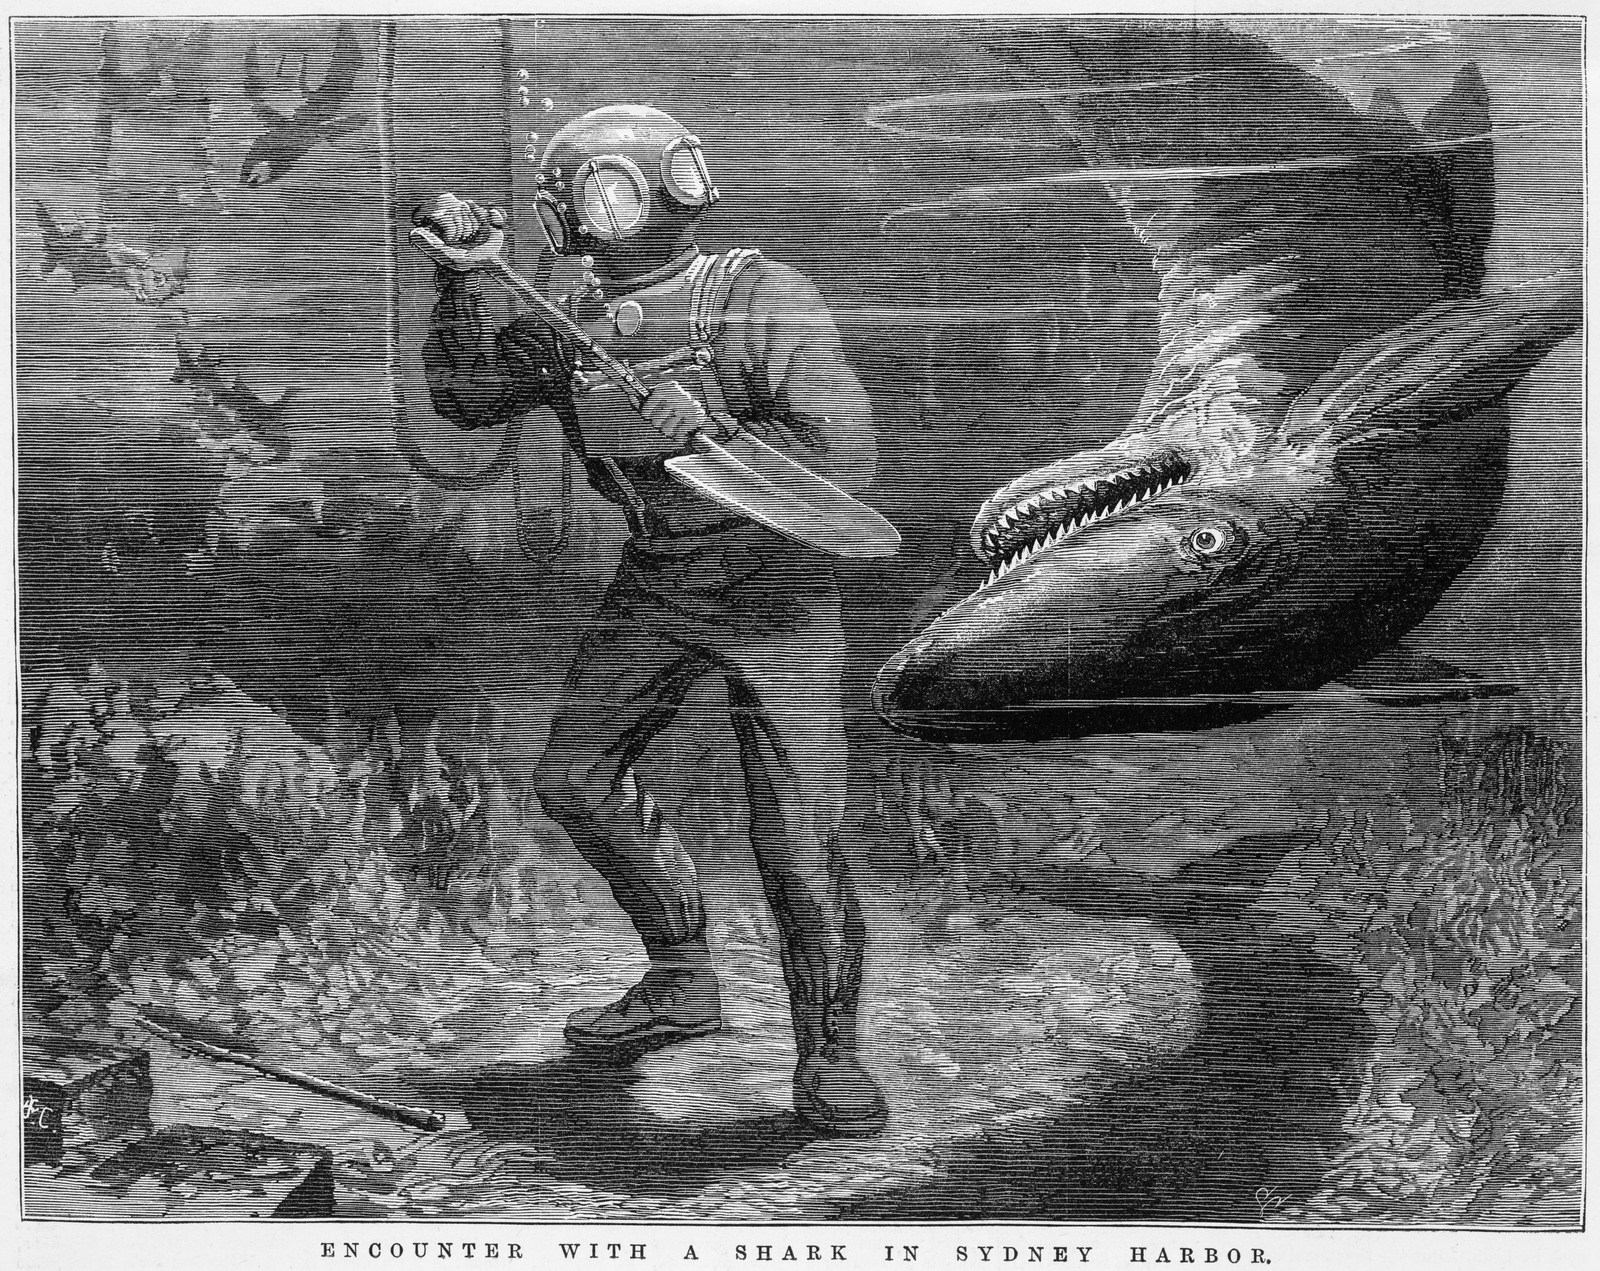 Black and white lithograph underwater view of man in diving suit fighting off a shark